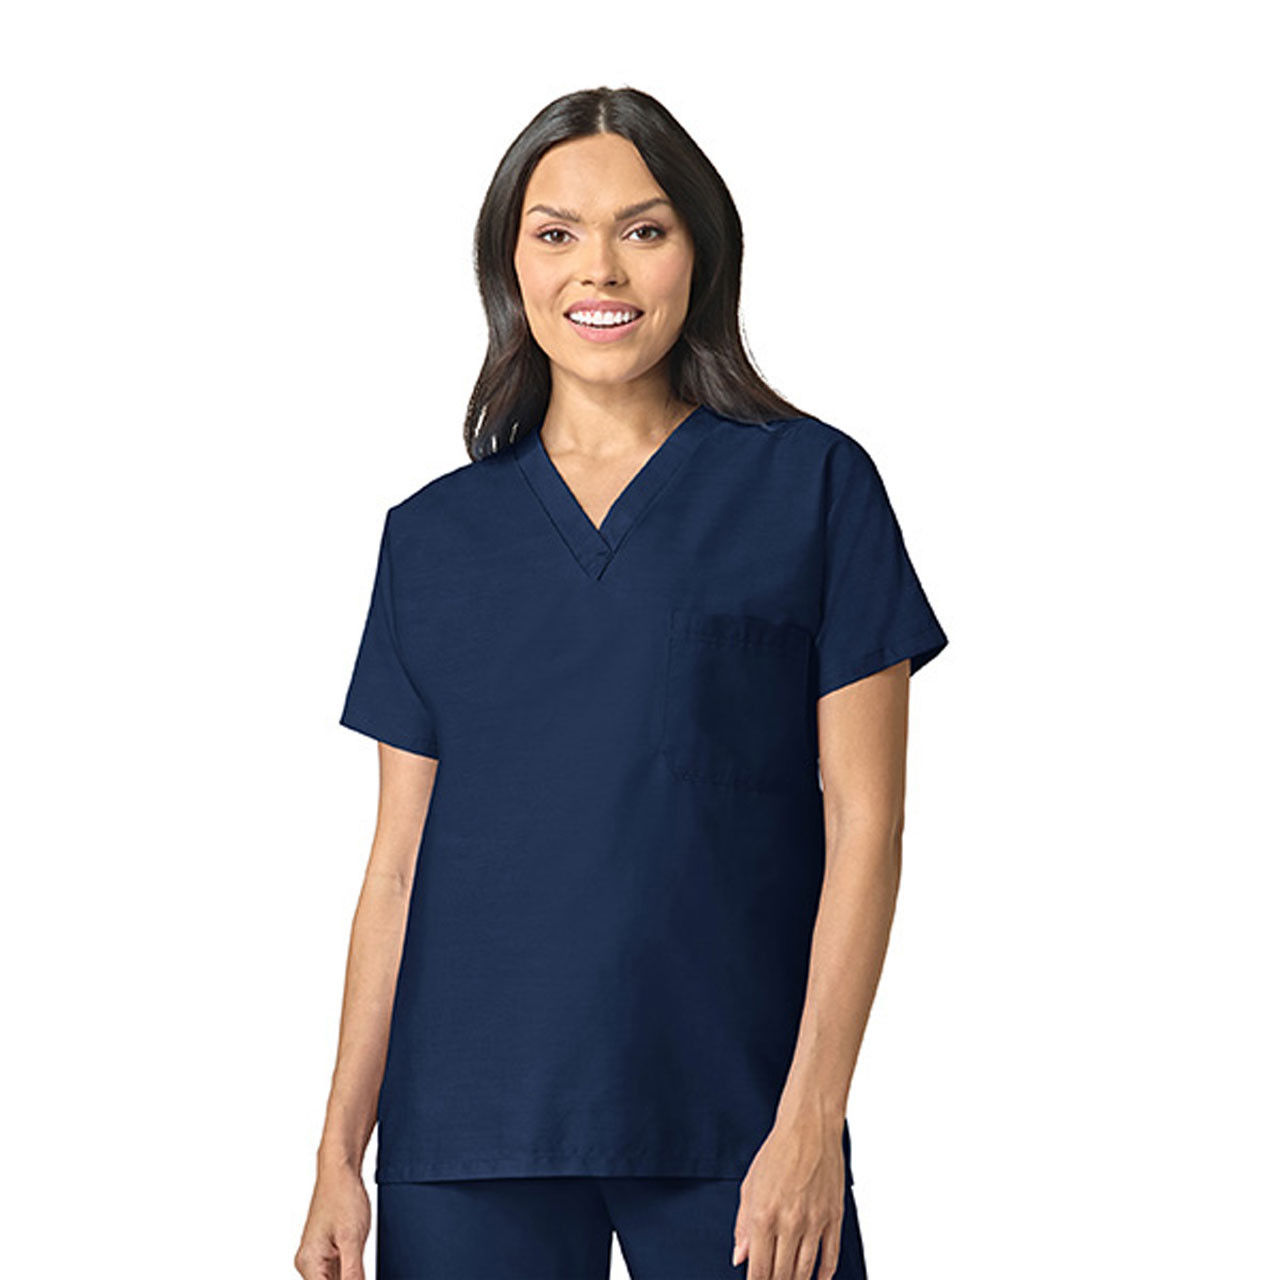 What design features does the V Neck Scrub Top have?